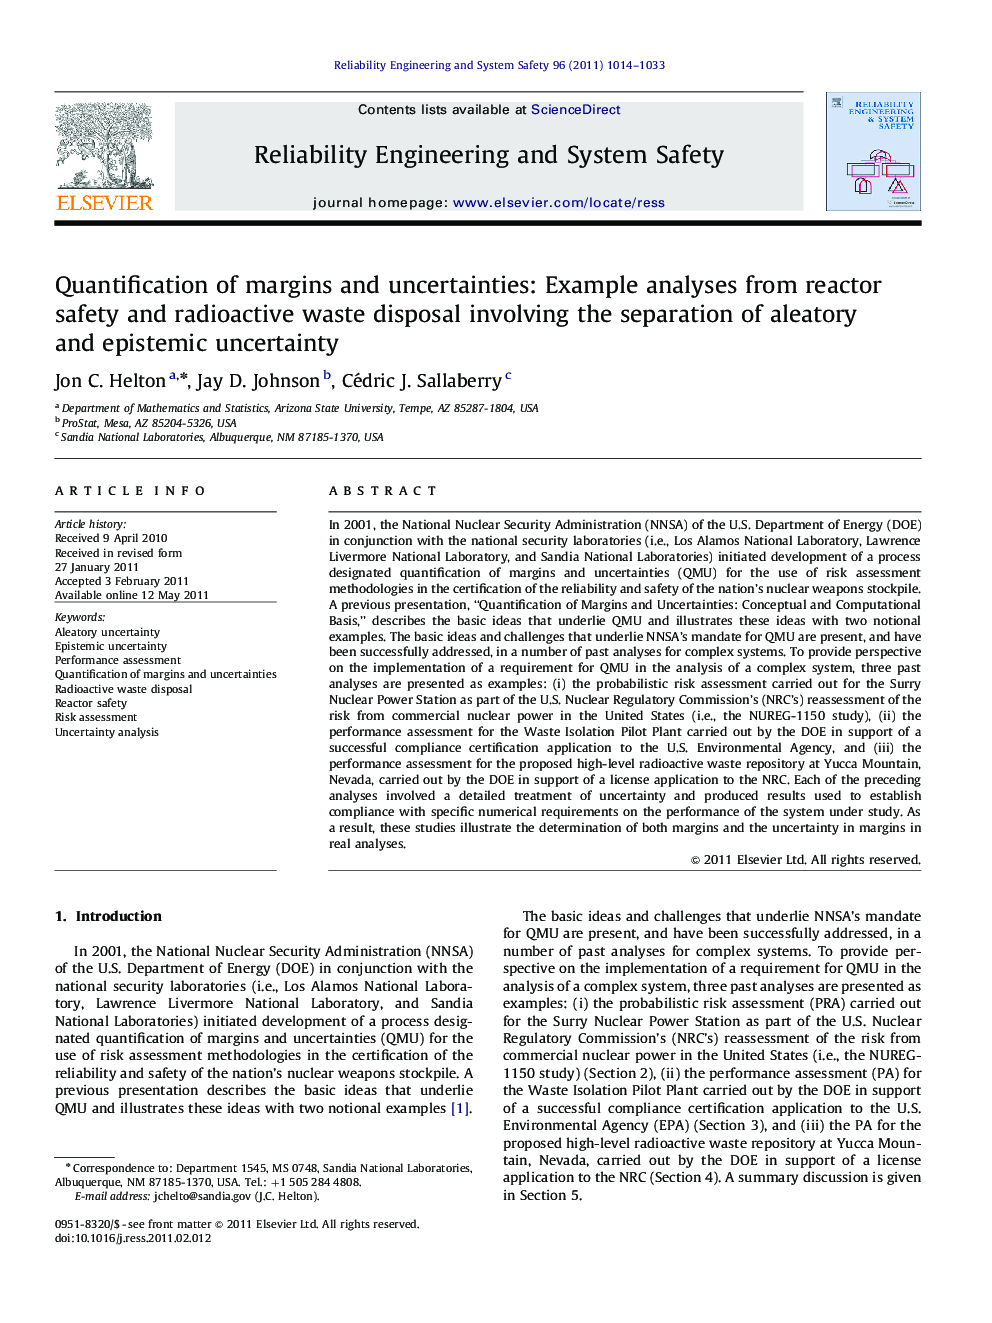 Quantification of margins and uncertainties: Example analyses from reactor safety and radioactive waste disposal involving the separation of aleatory and epistemic uncertainty